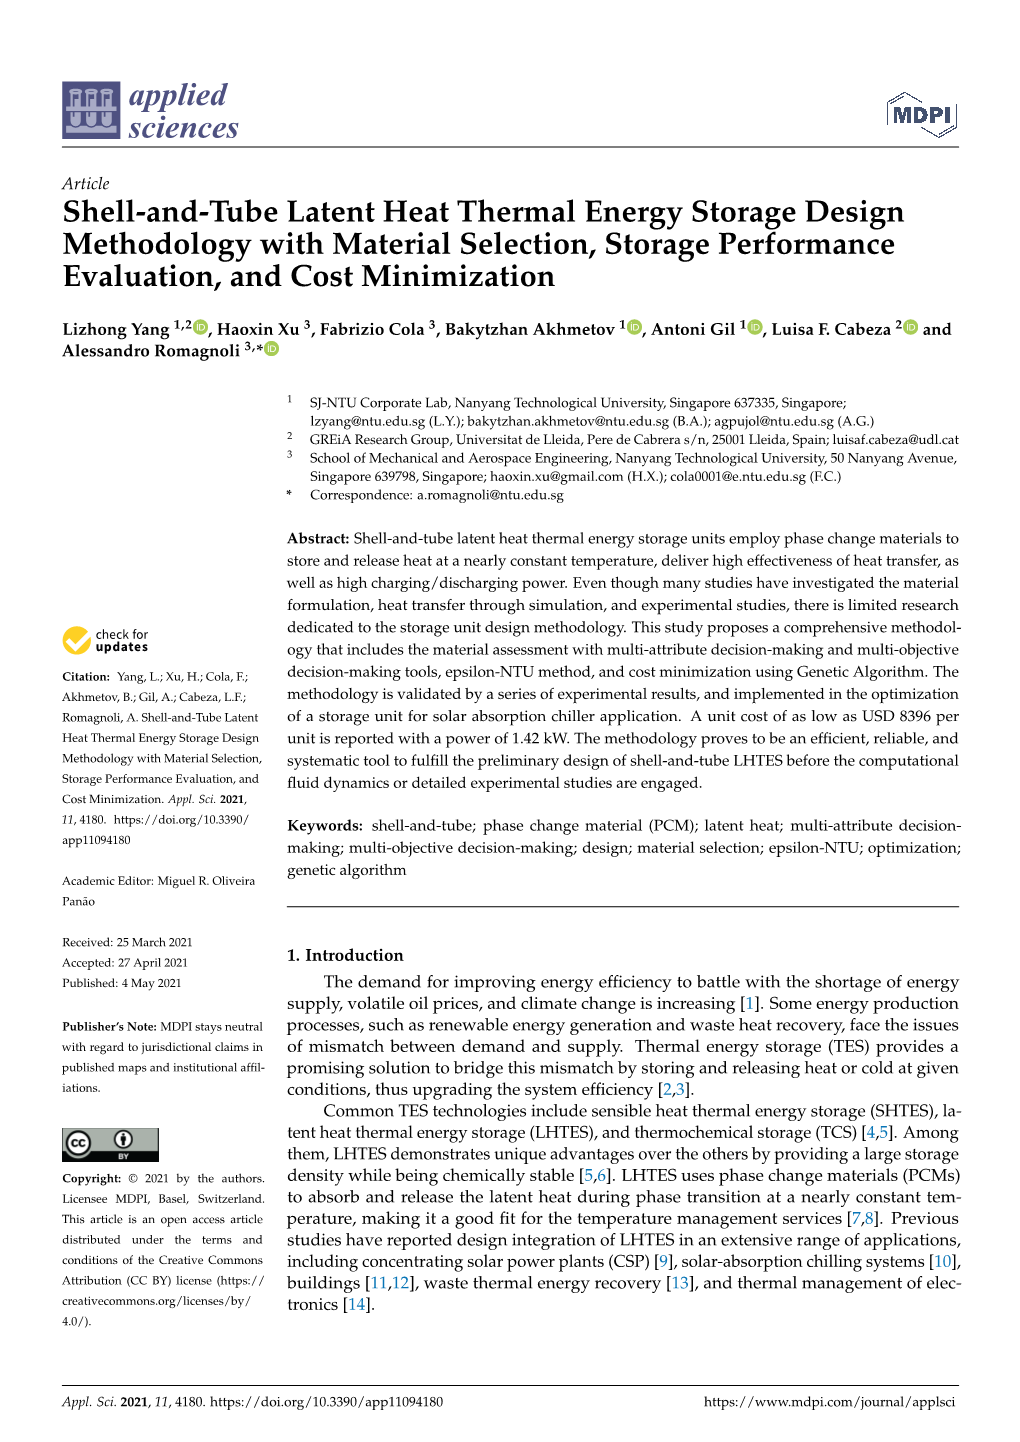 Shell-And-Tube Latent Heat Thermal Energy Storage Design Methodology with Material Selection, Storage Performance Evaluation, and Cost Minimization